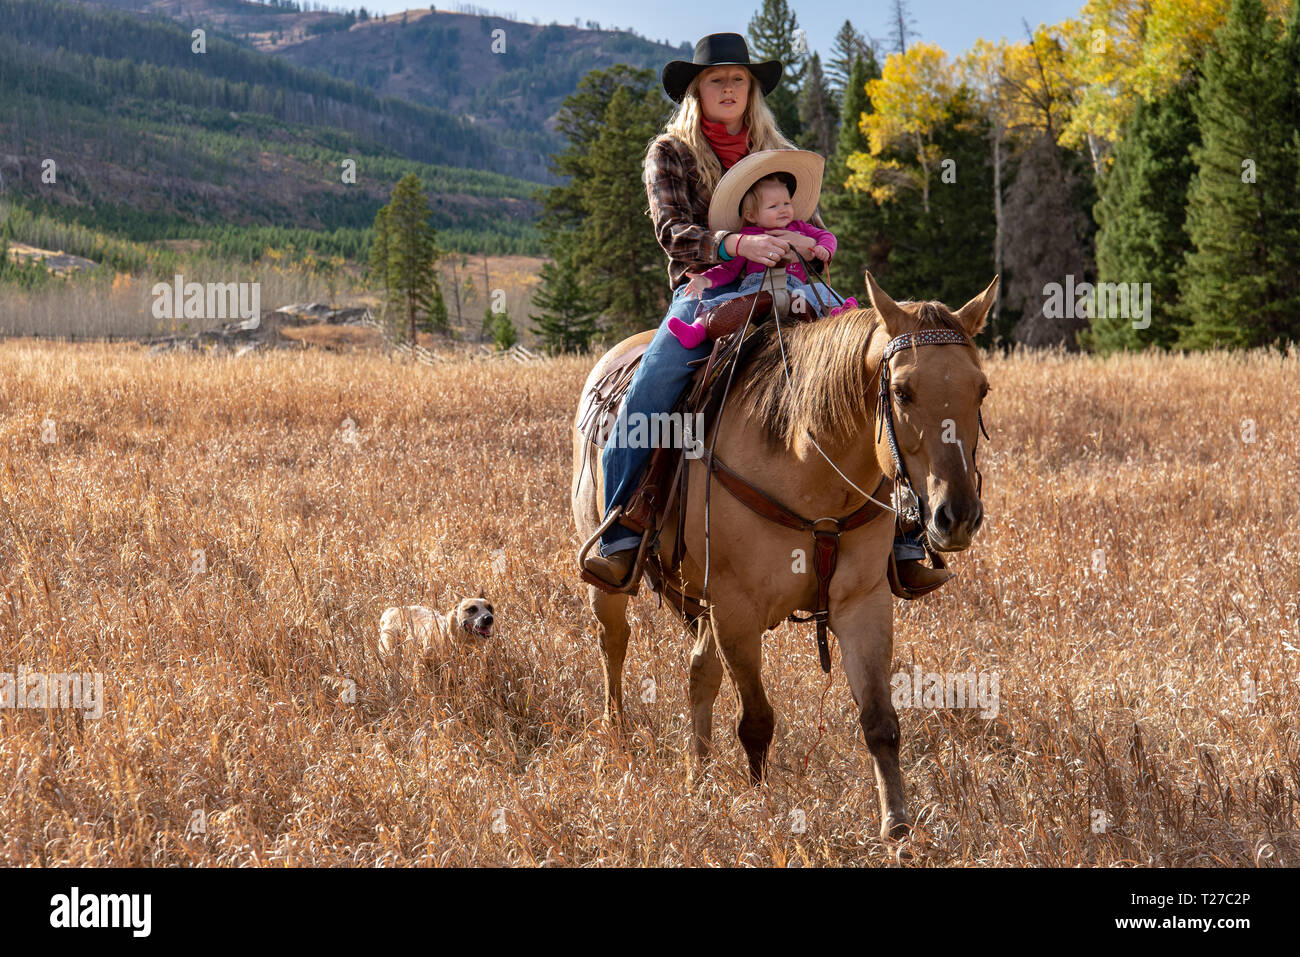 Cowgirl and baby on horseback in Wyoming, USA Stock Photo